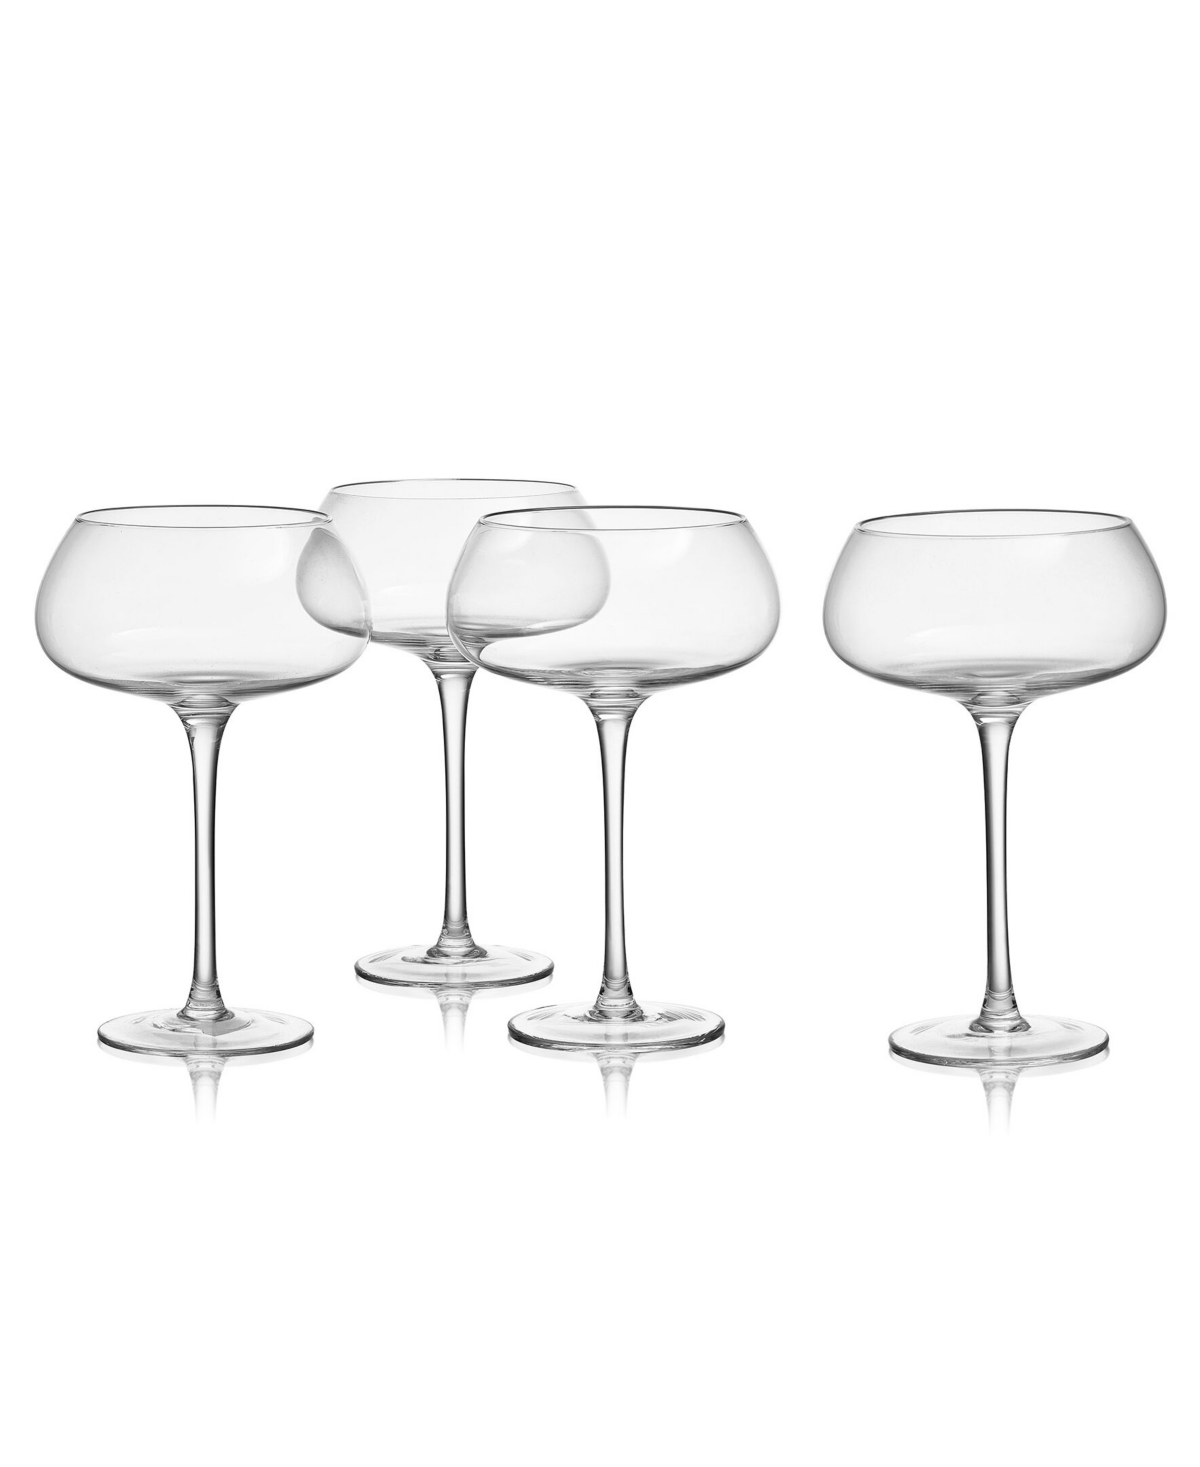 Mikasa Craft 15 Ounce Coupe Glass 4-piece Set In Clear